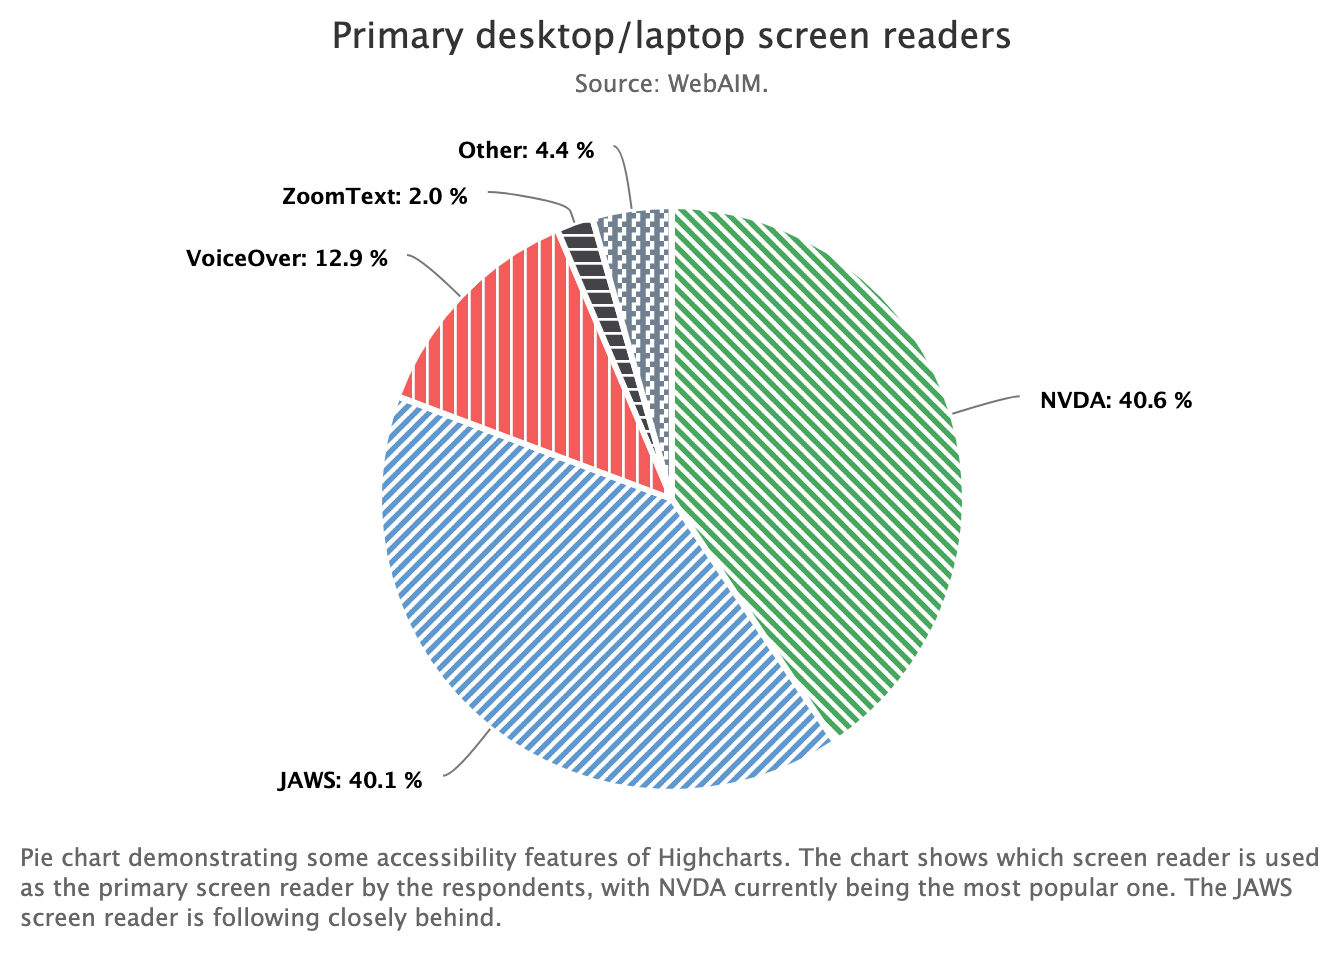 Pie chart demonstrating some accessibility features of Highcharts. The chart shows which screen reader is used as the primary screen reader by the respondents, with NVDA currently being the most popular one. The JAWS screen reader is following closely behind.